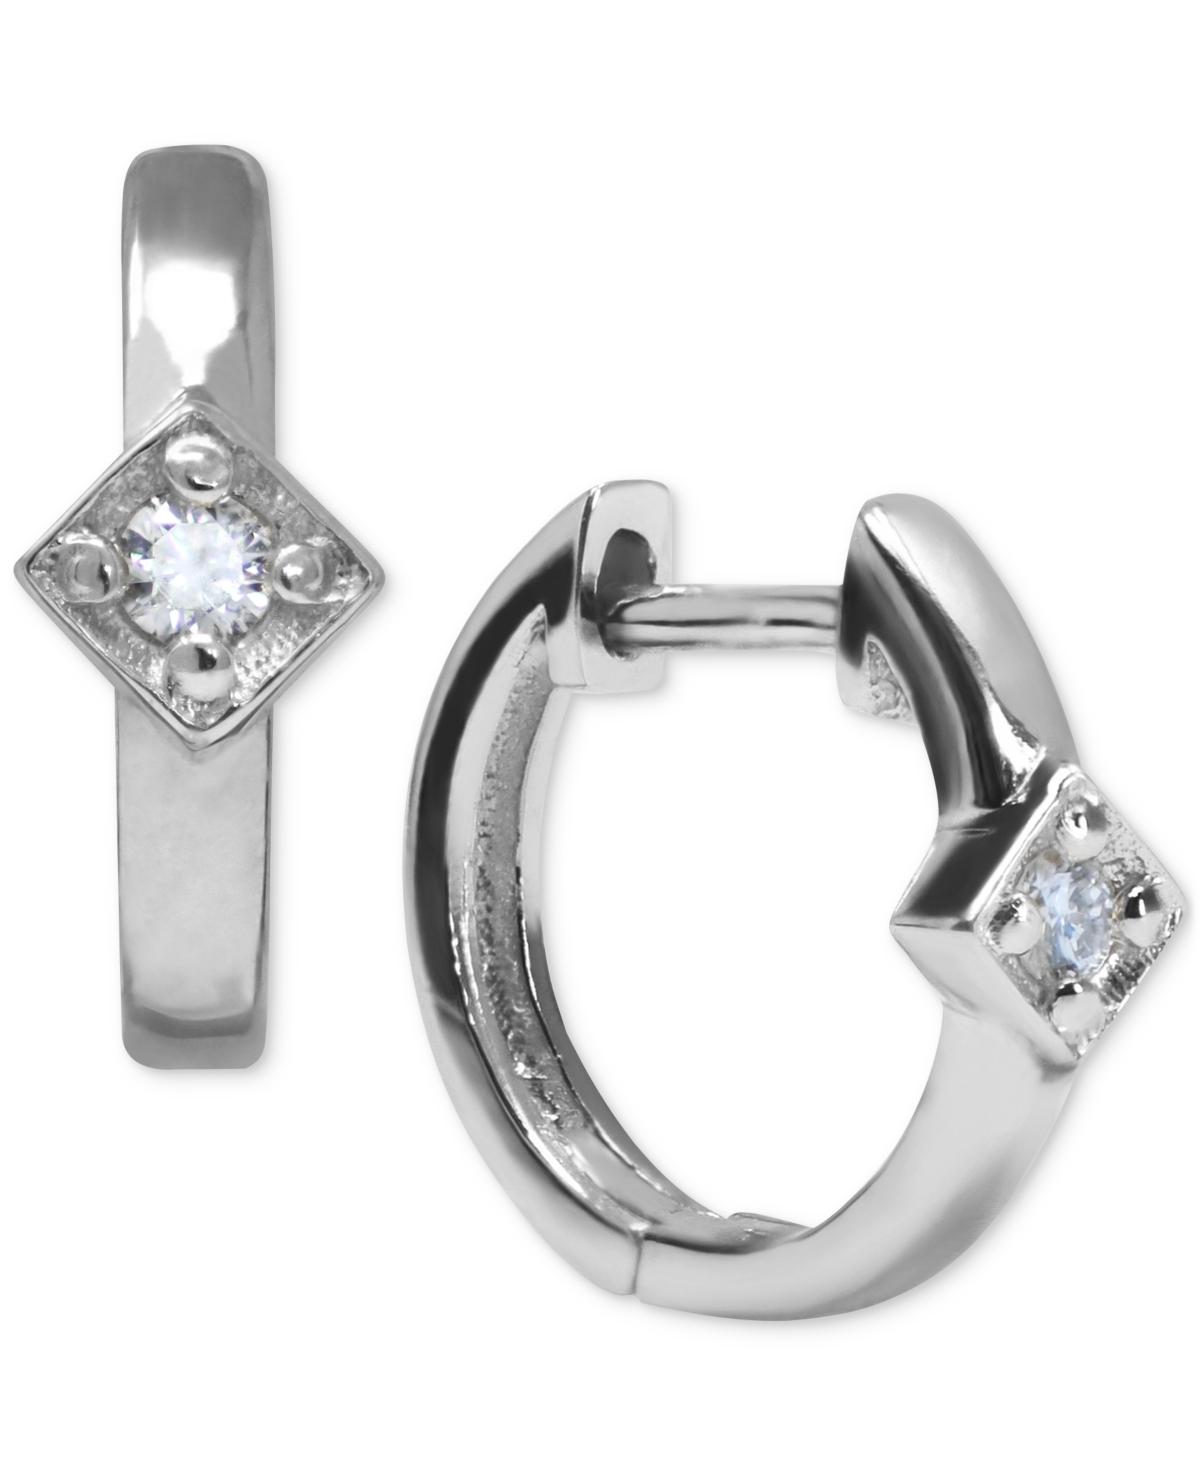 Anzie White Sapphire Accent Extra Small Huggie Hoop Earrings In Sterling Silver, 0.47"